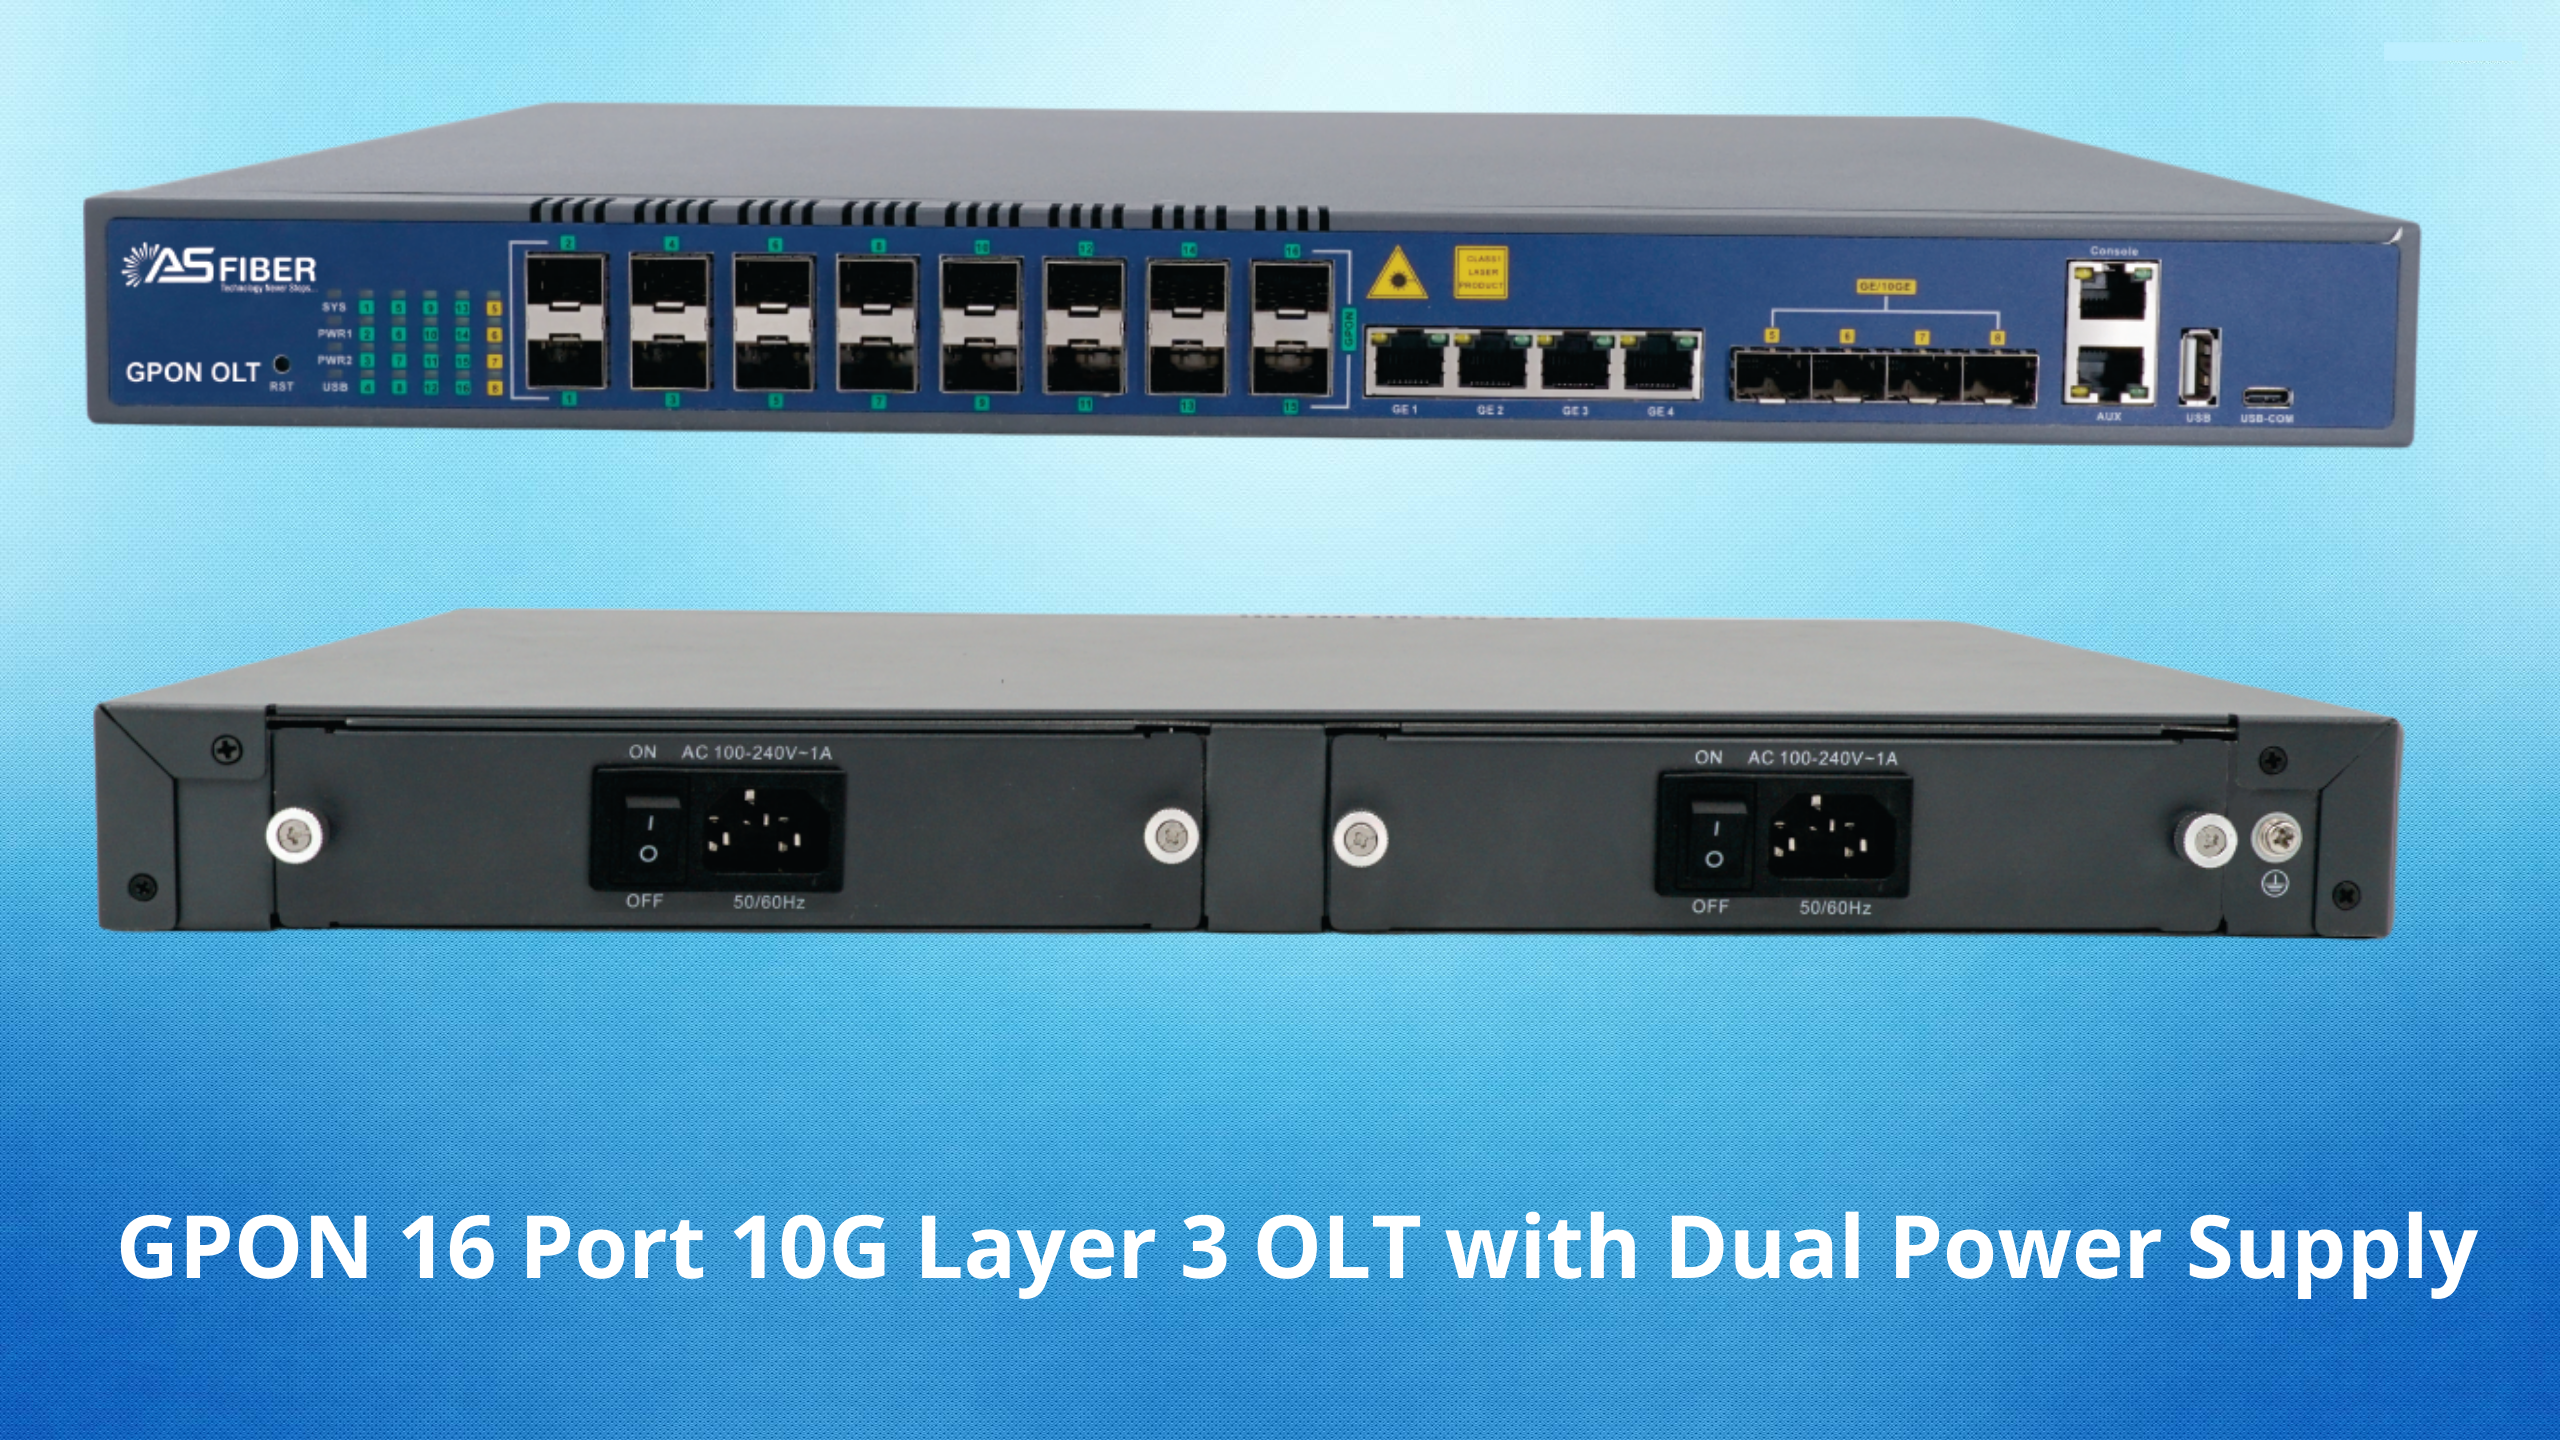 GPON 48 Port 10G Layer 3 OLT with Dual Power Supply (2)